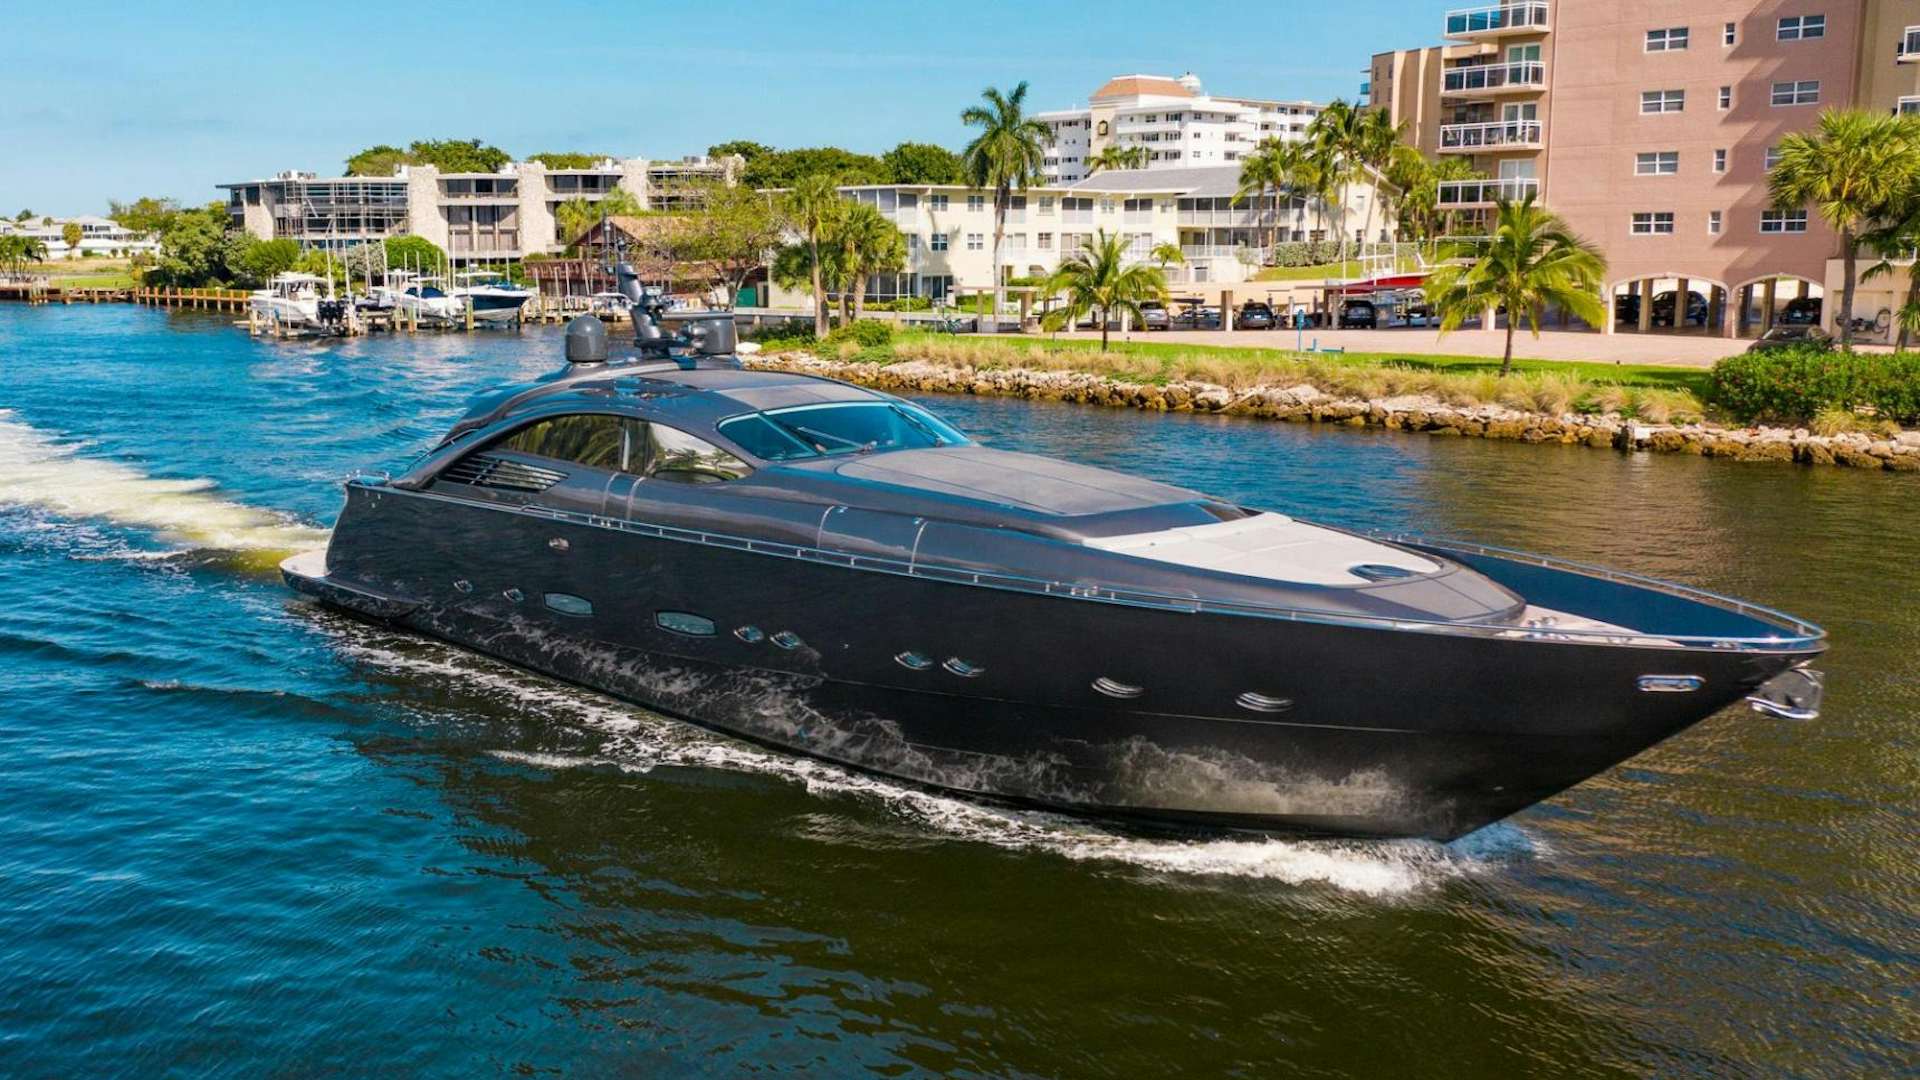 Watch Video for AMORA Yacht for Sale